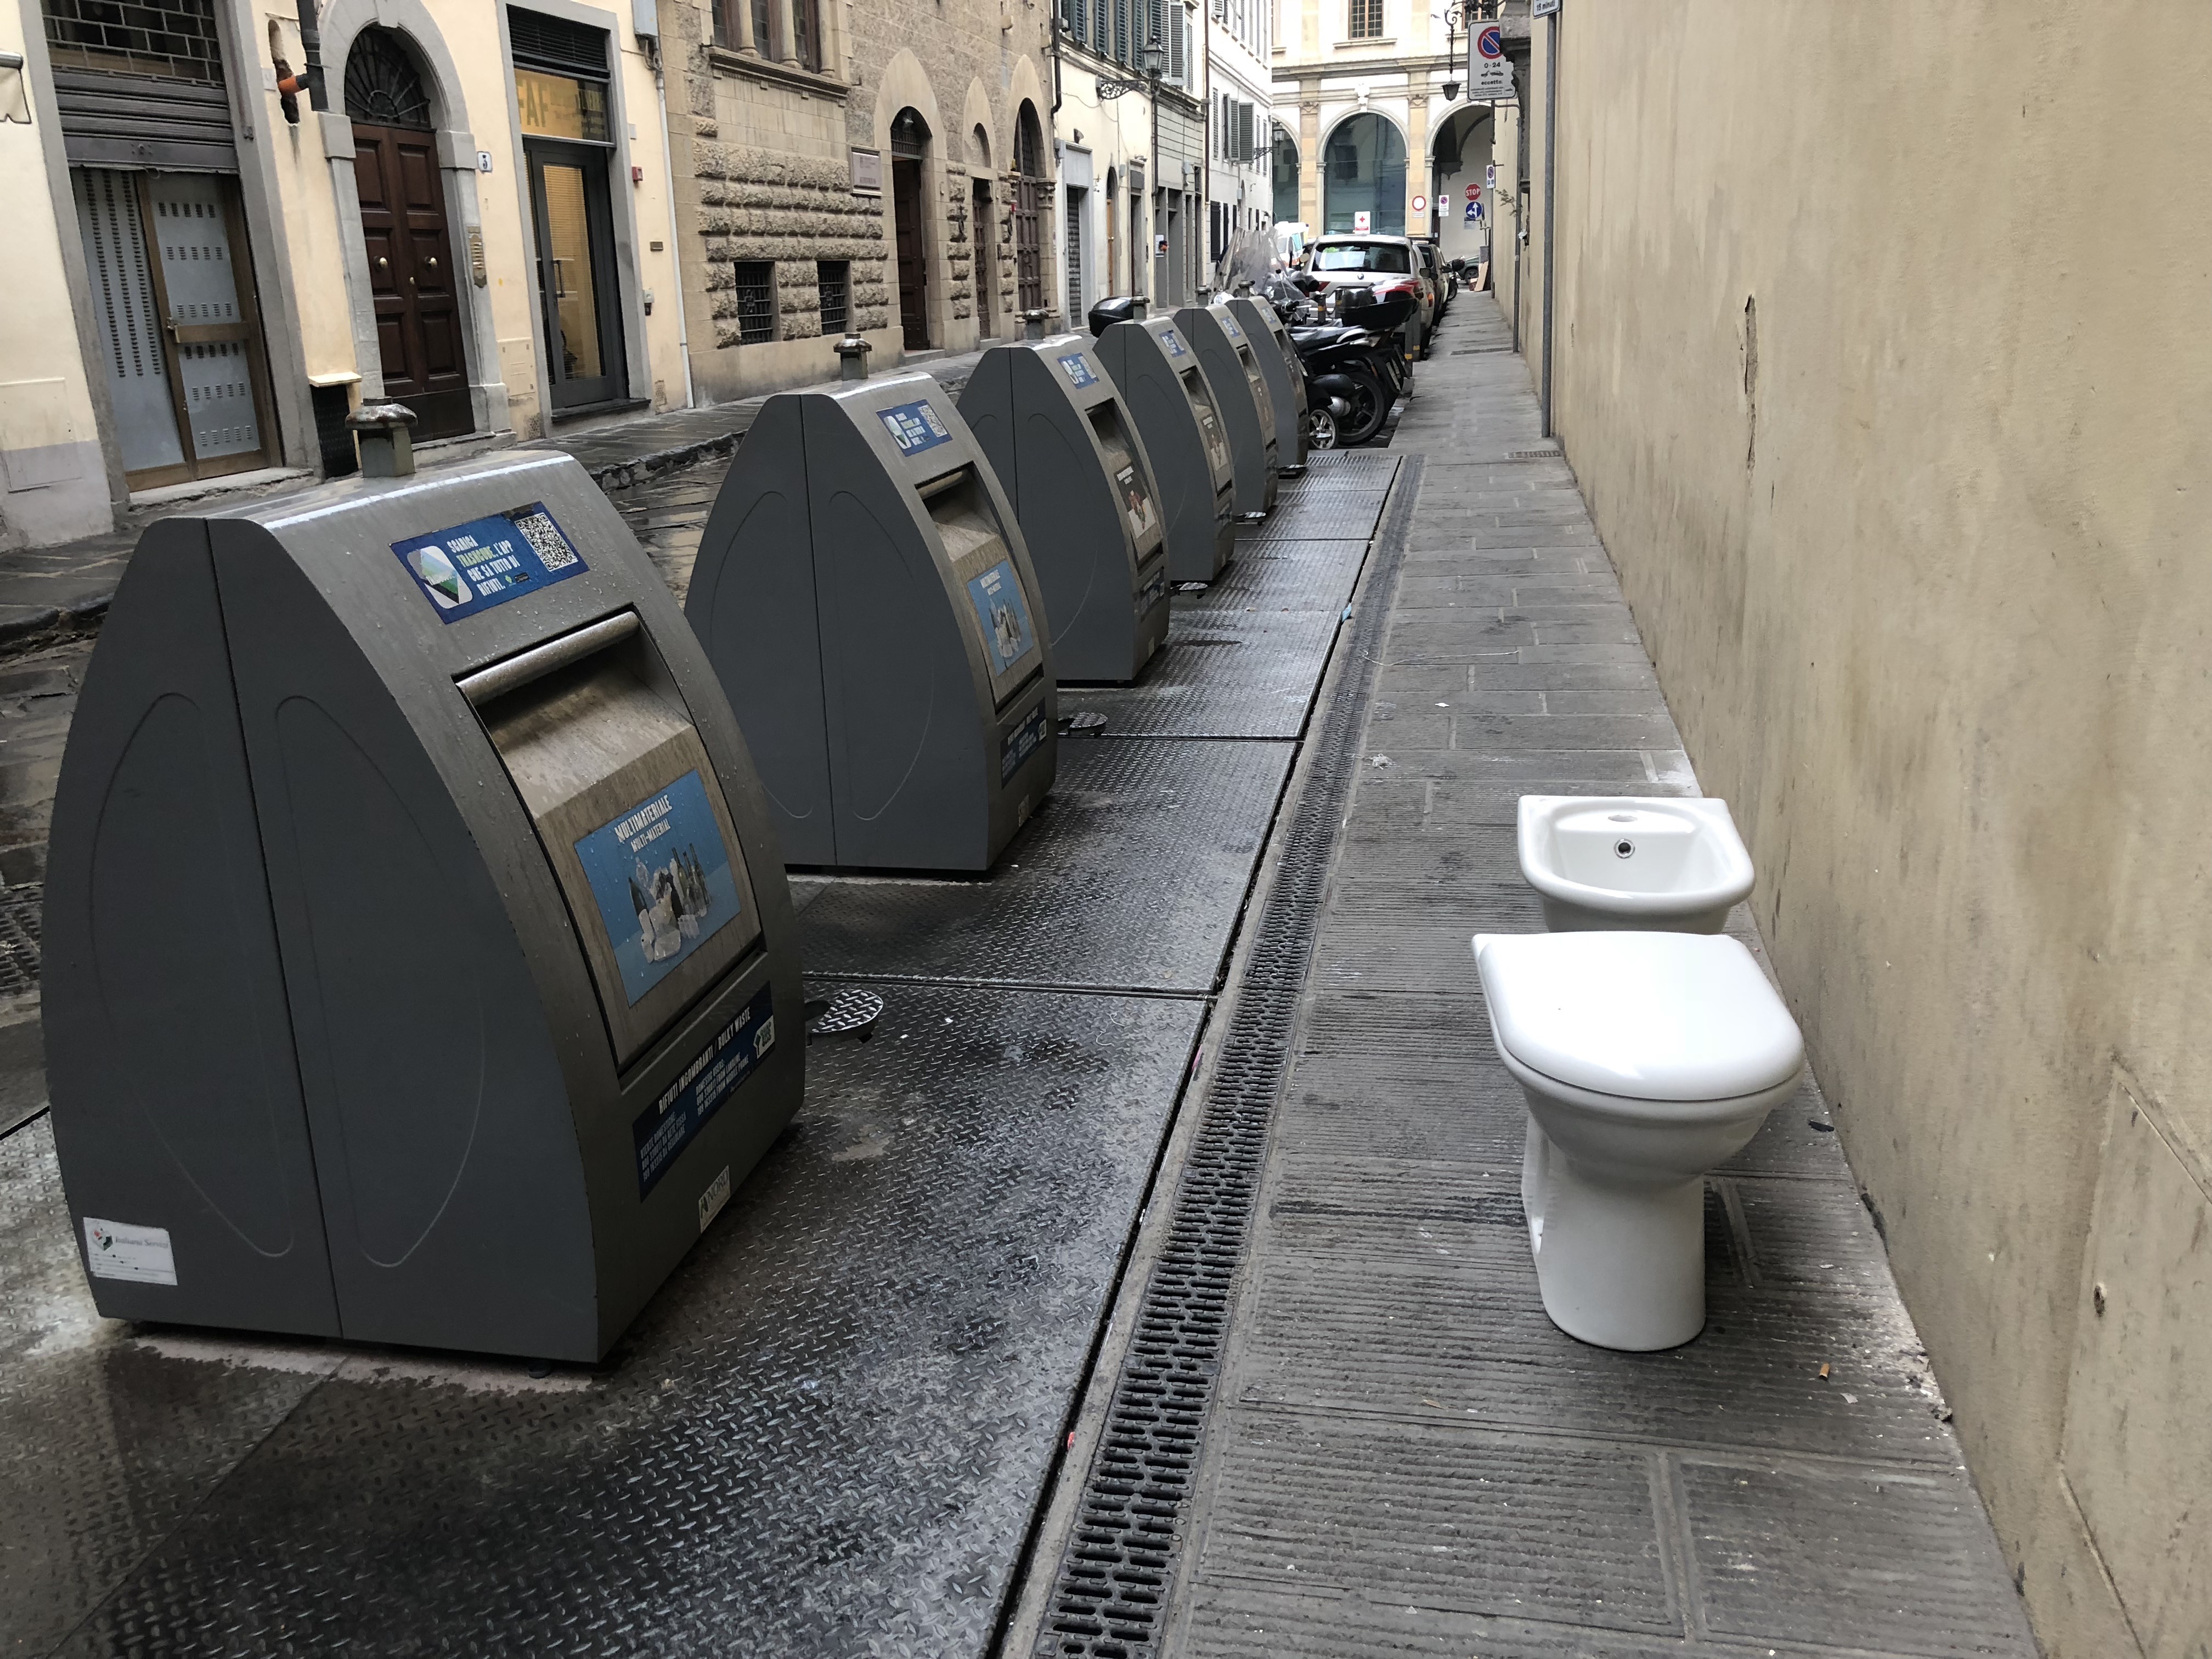 Florence's trash cans